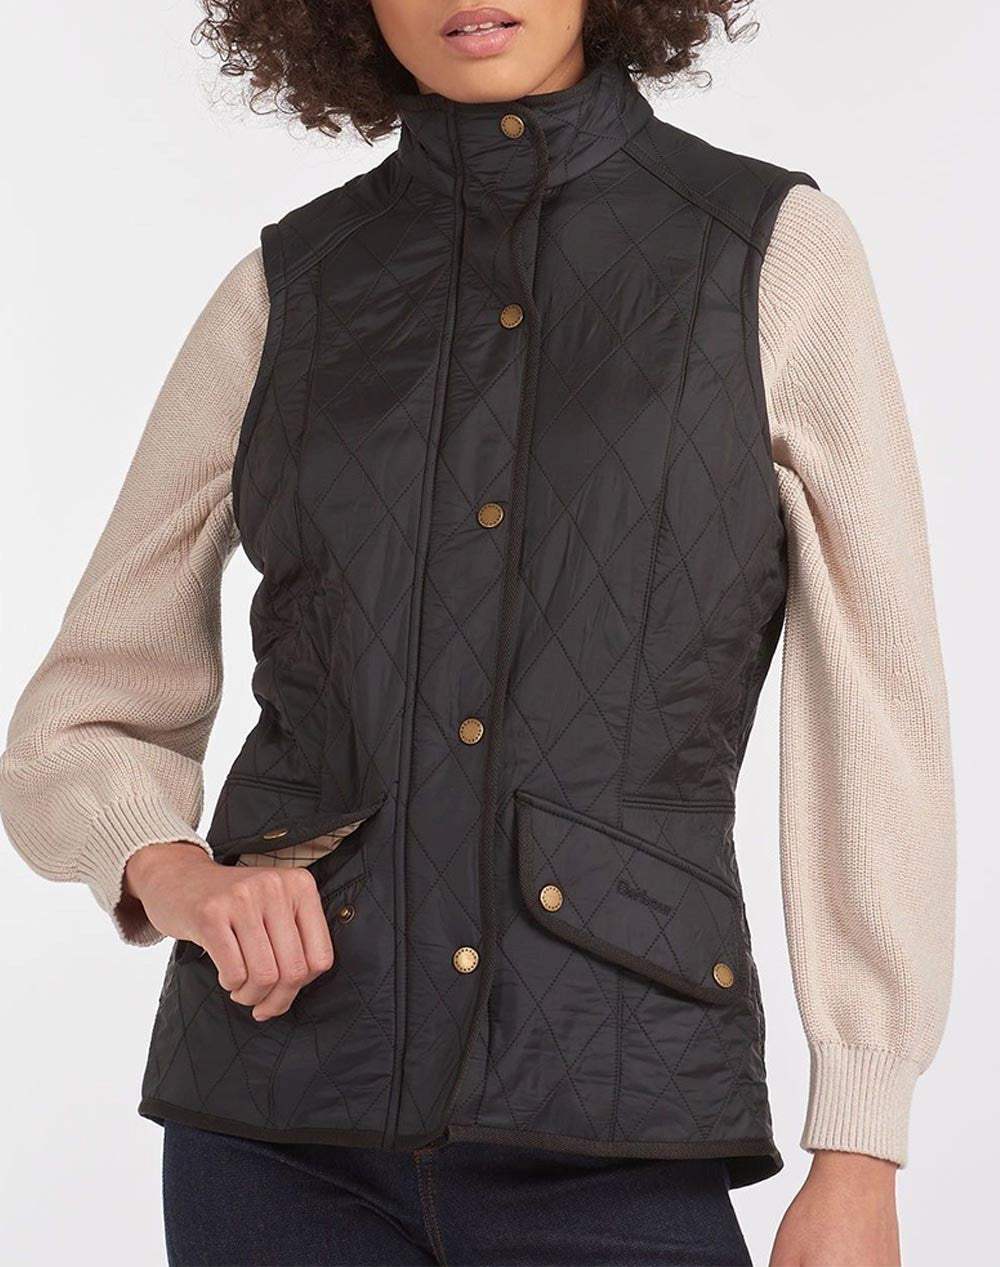 Cavalry Gilet by Barbour - The Luxury Promotional Gifts Company Limited